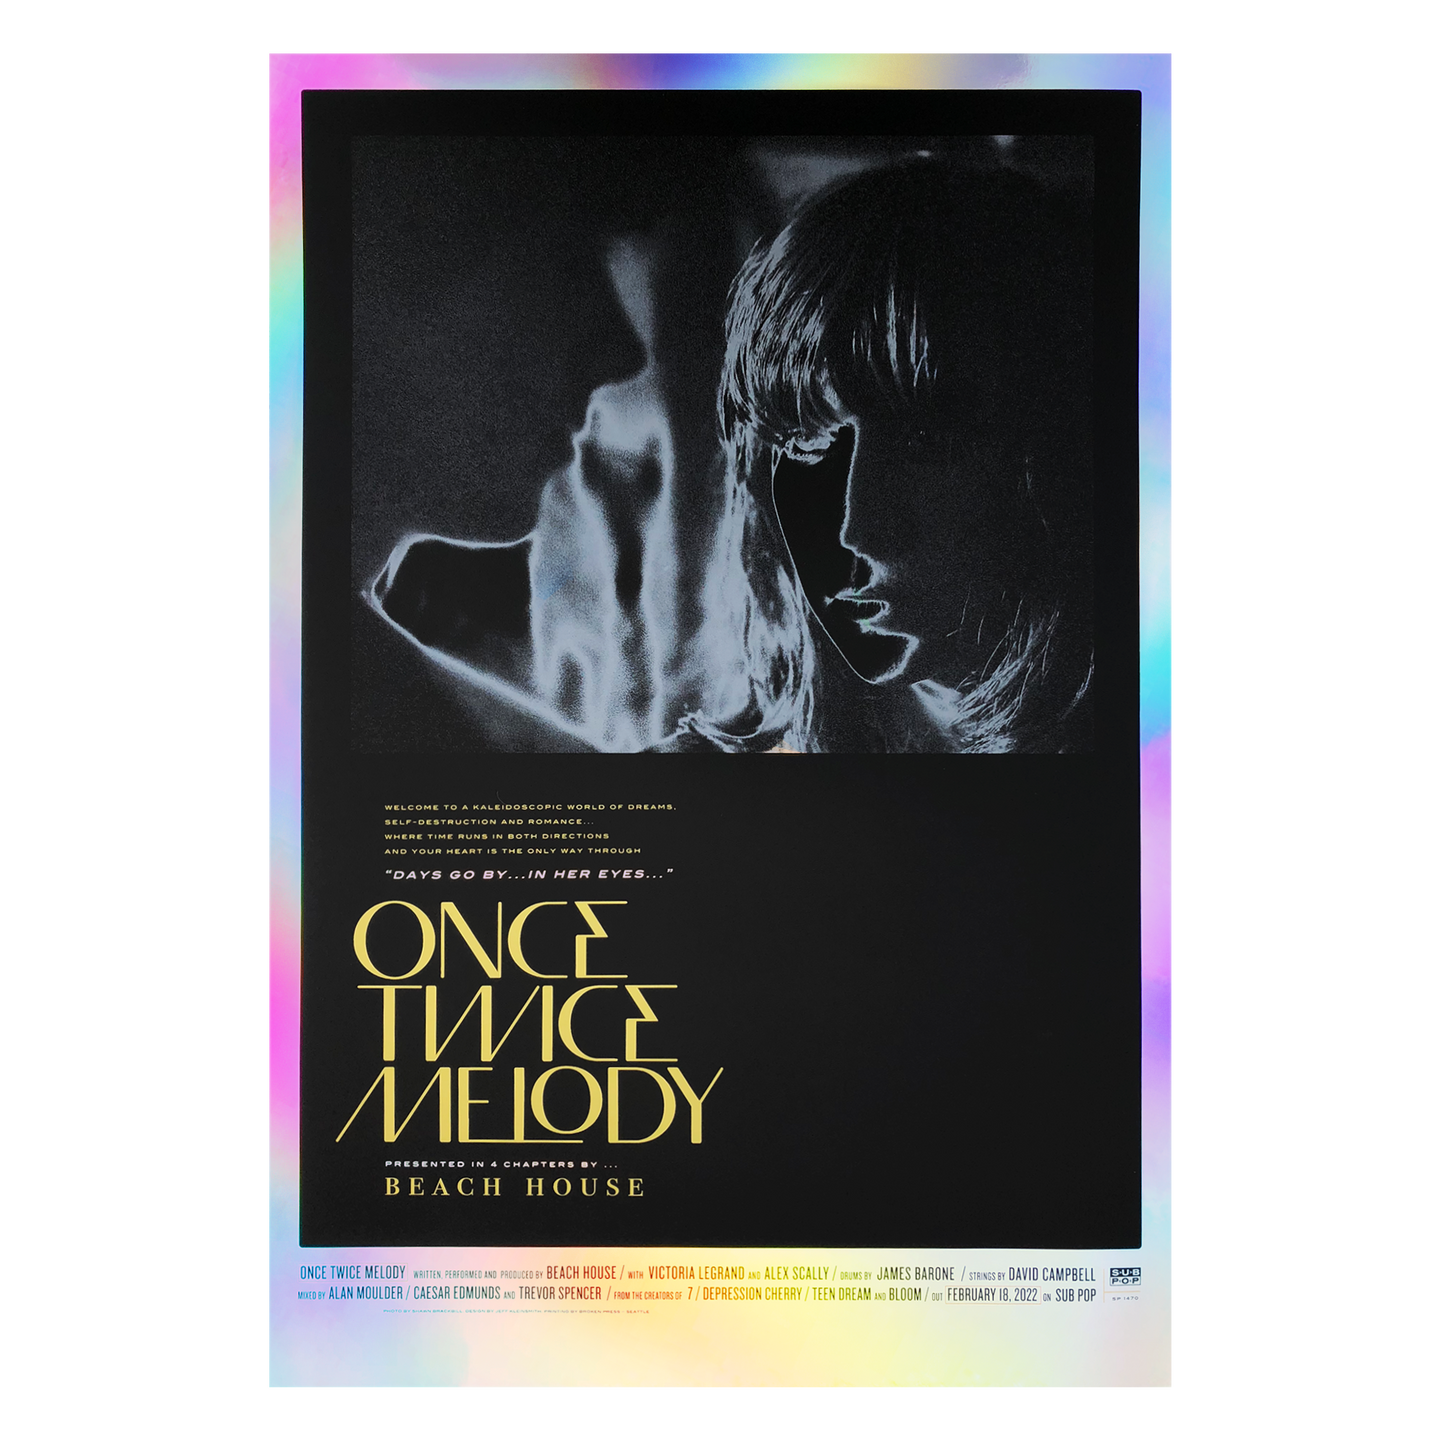 Once Twice Melody Holographic Silk Screen Limited Edition Poster